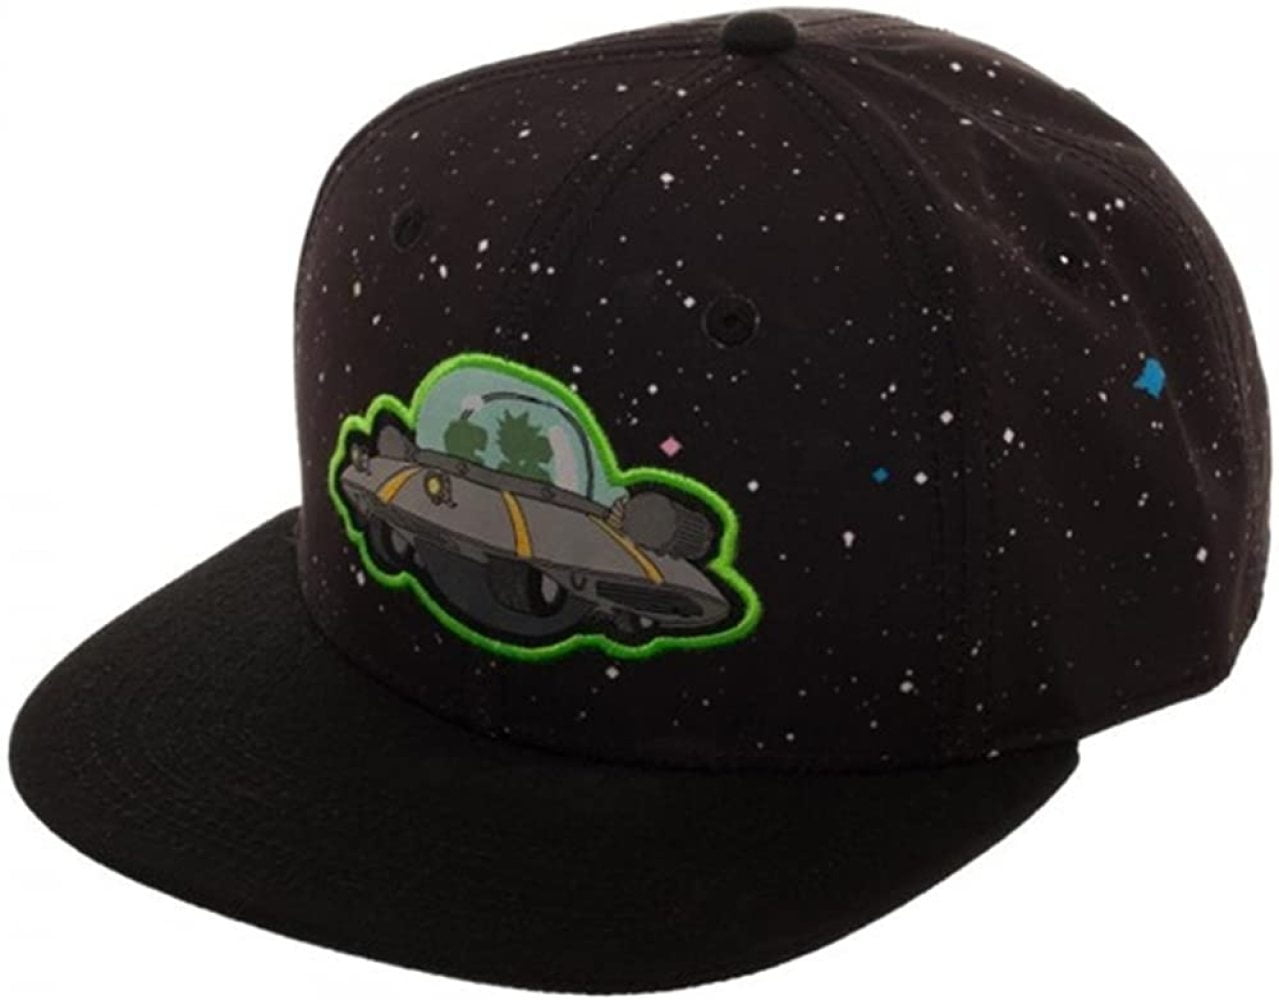 ADULT SWIM RICK & MORTY OUTER SPACE EMBROIDED SPACESHIP SNAPBACK HAT CAP CARTOON 